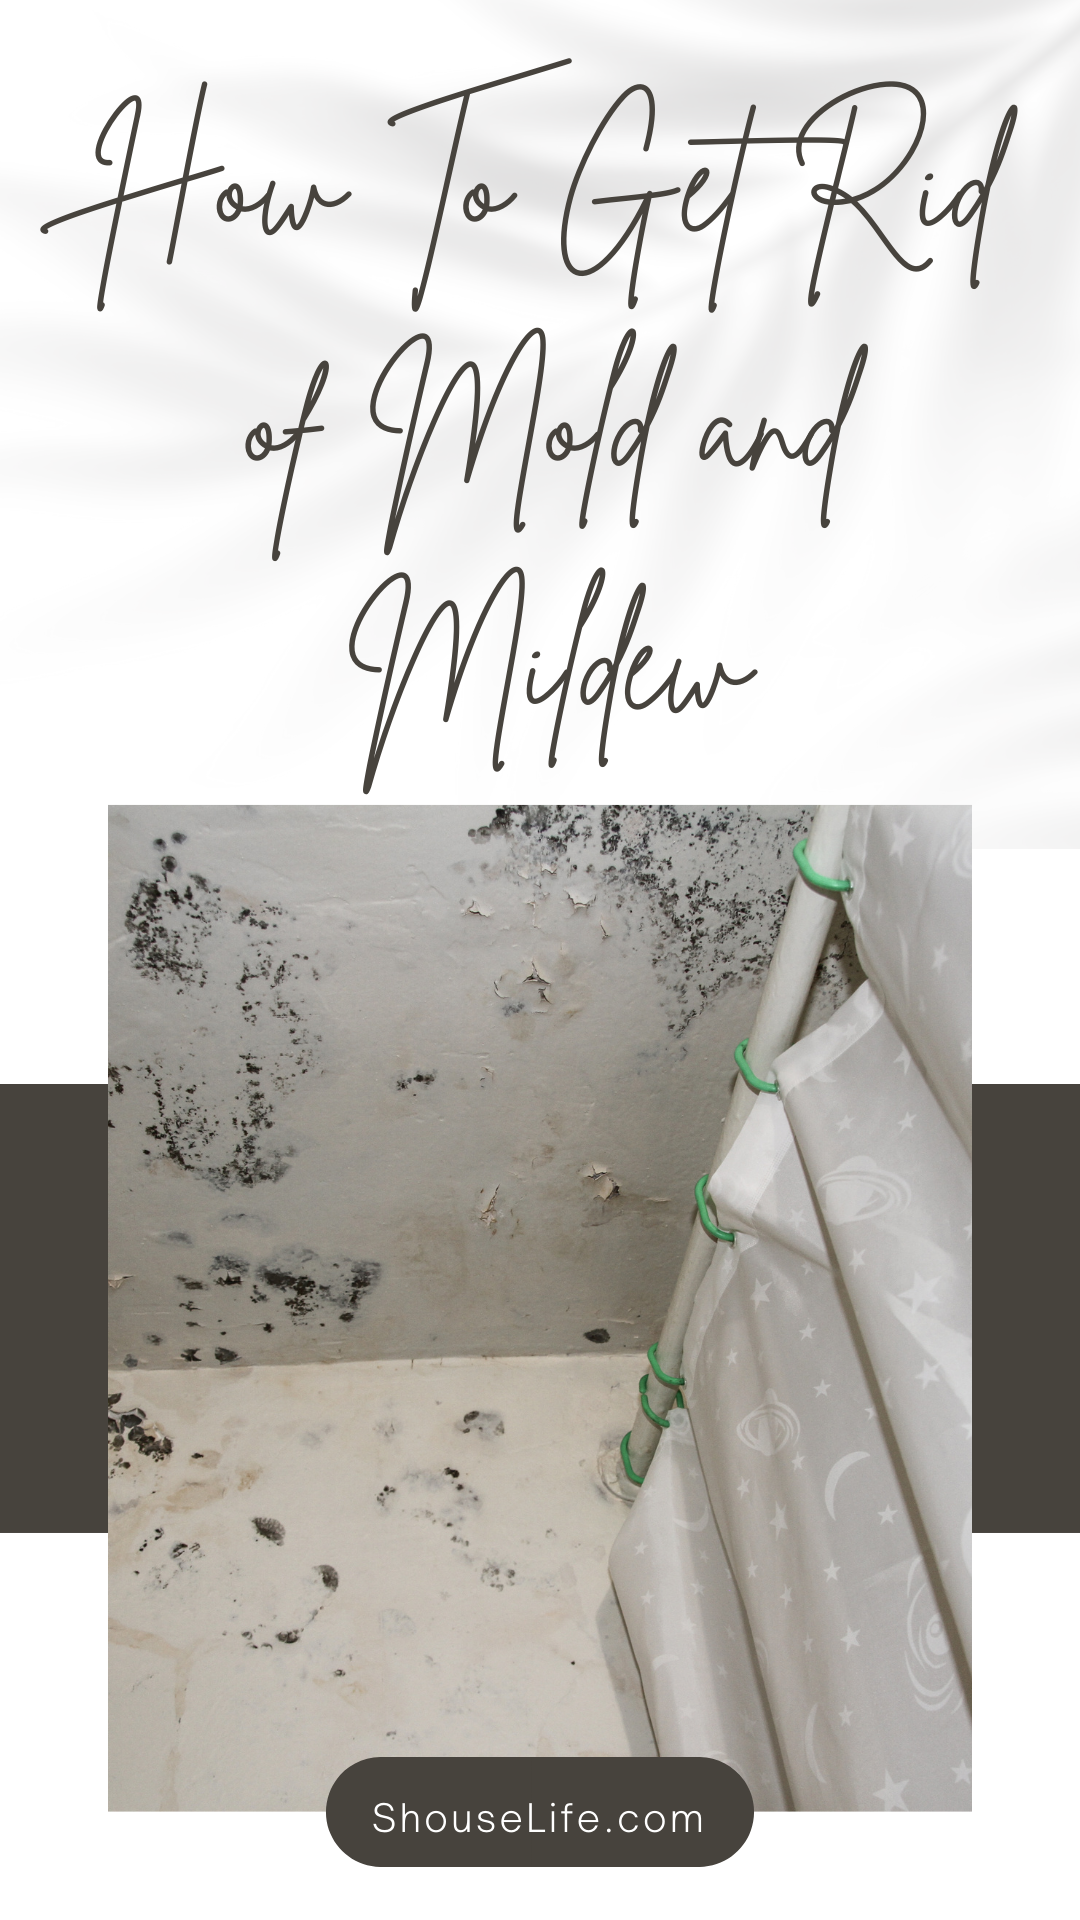 How To Get Rid of Mold and Mildew